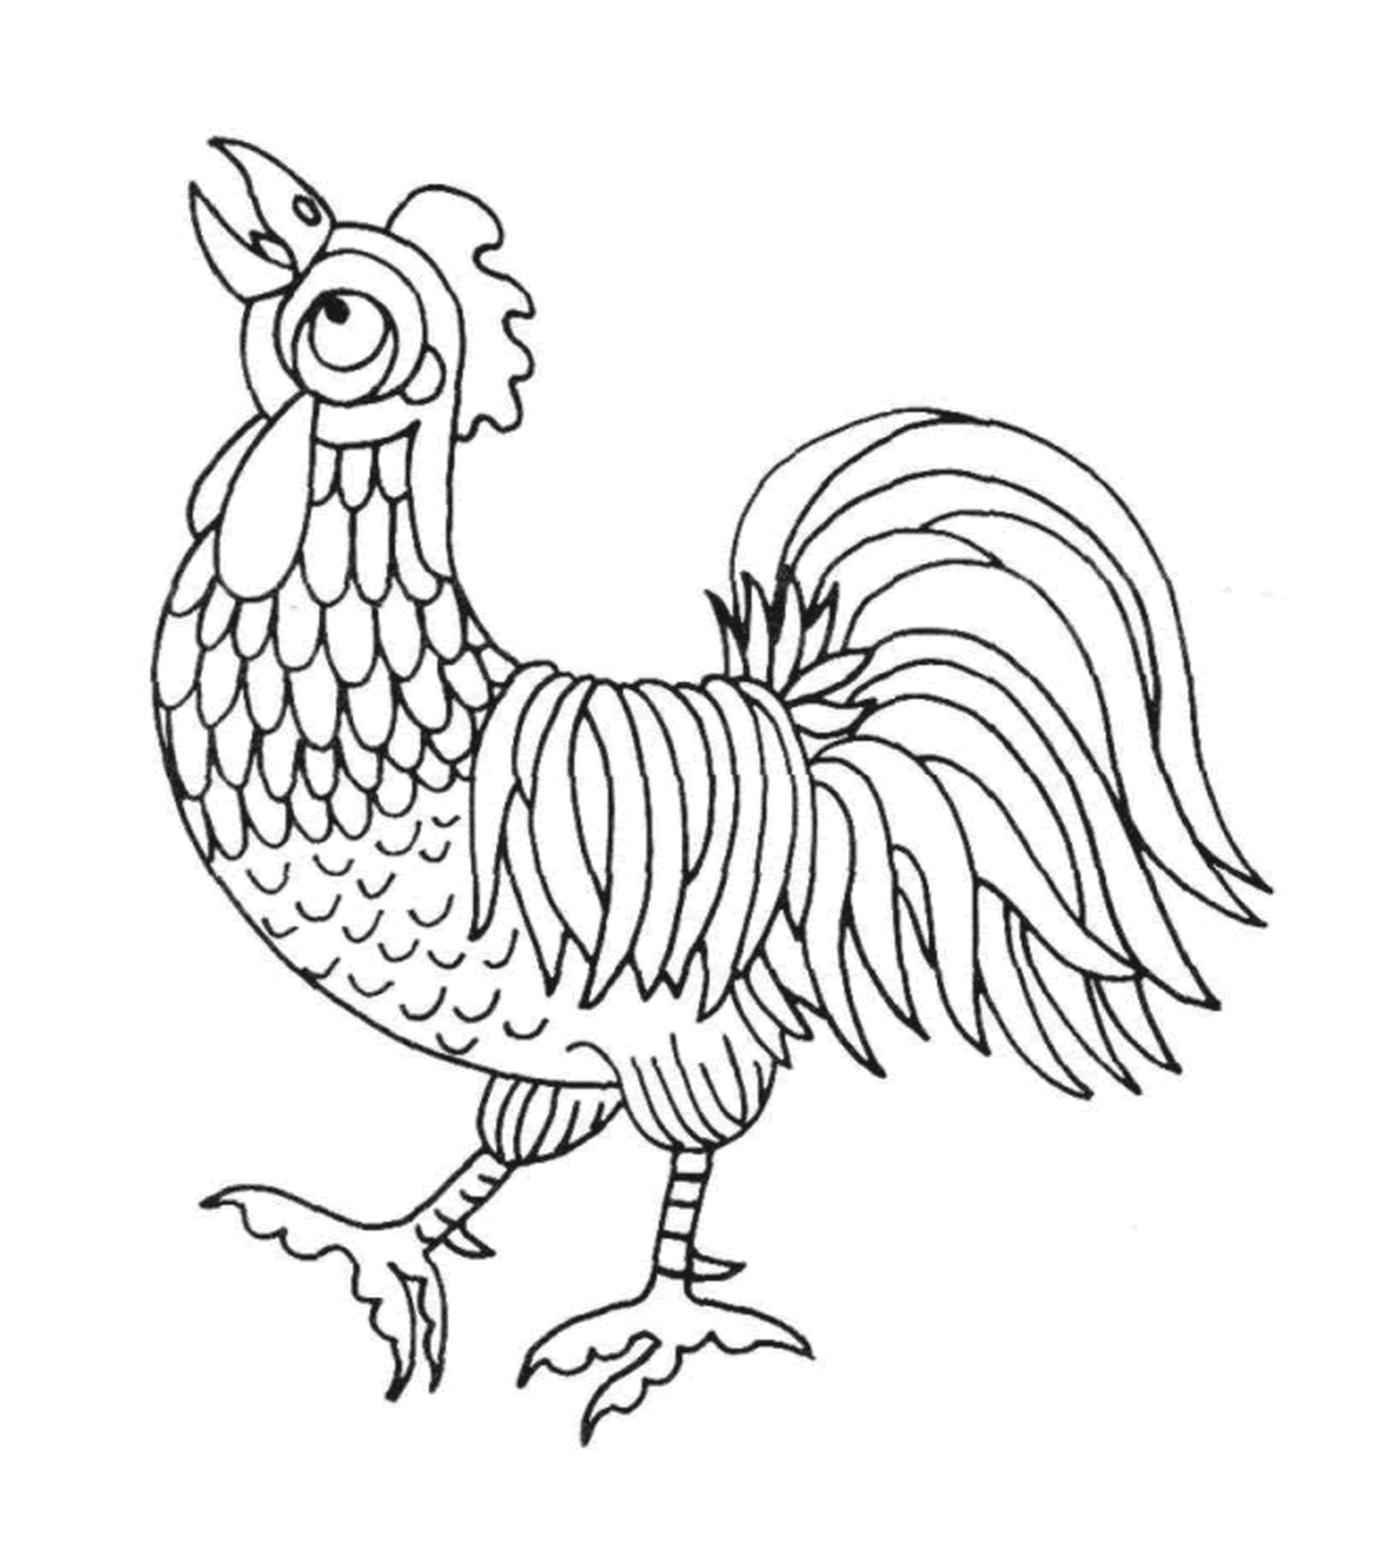  Bass-Rooster 